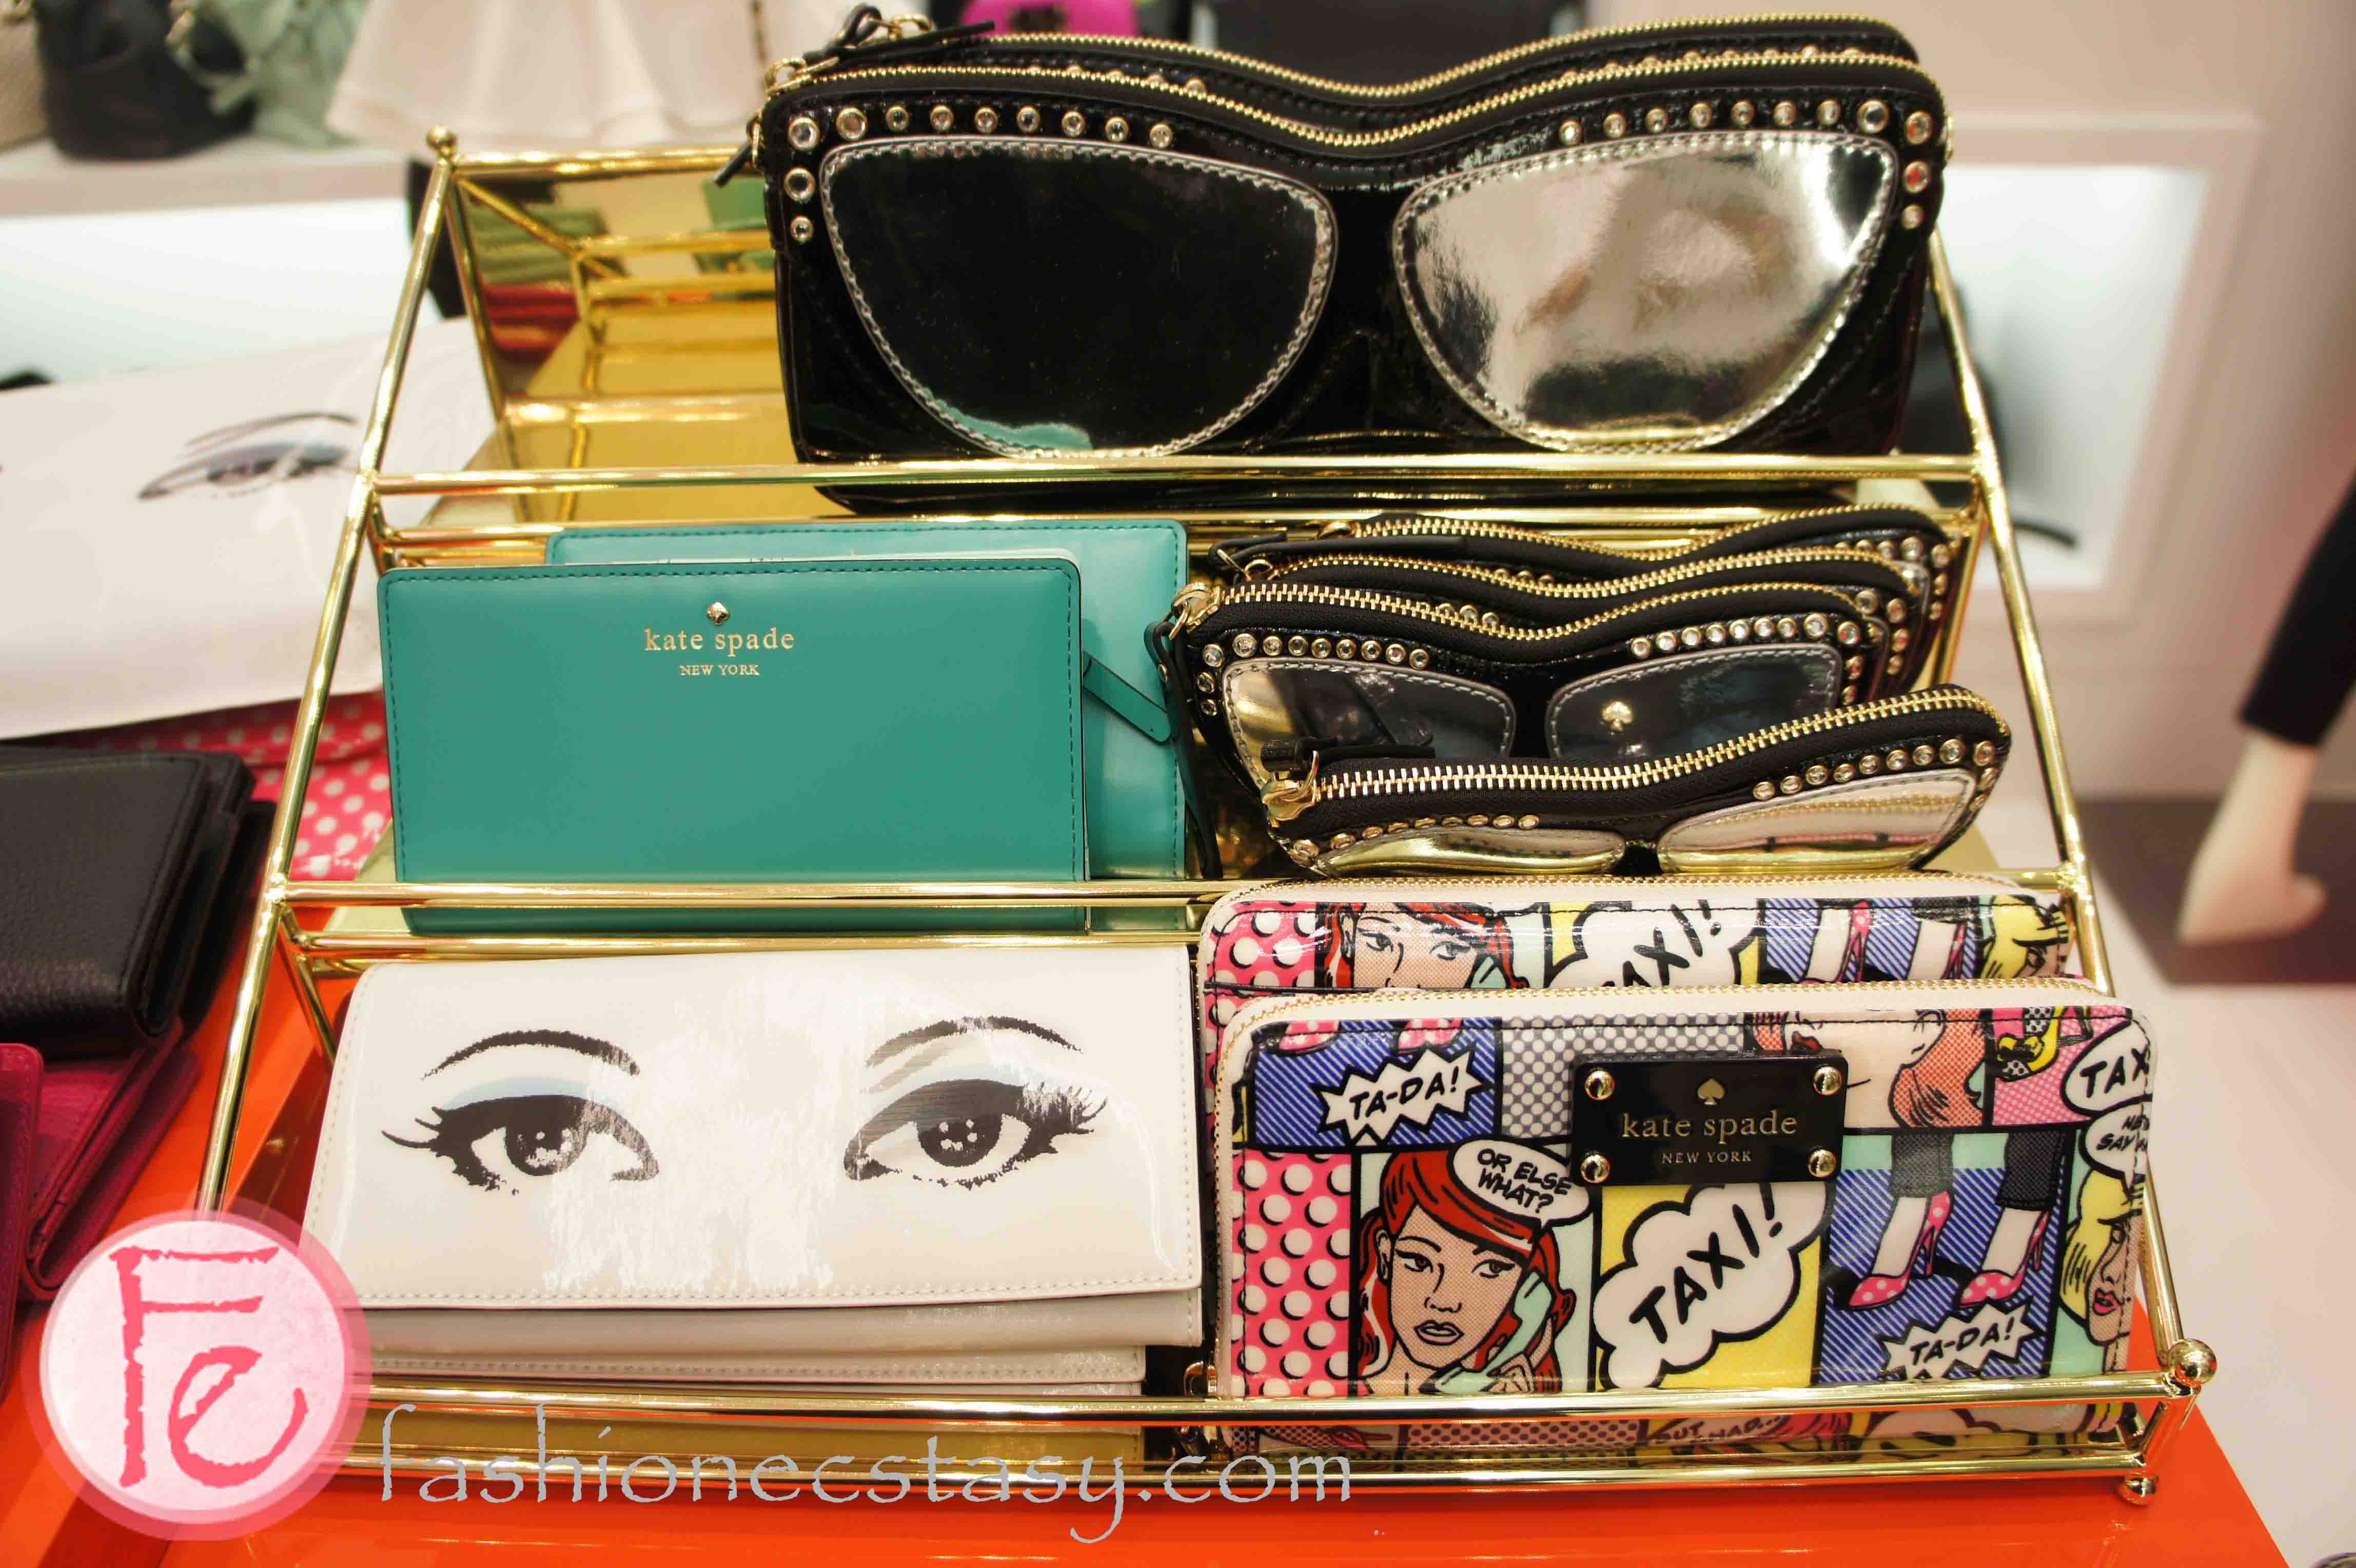 2013 Spring Kate Spade New York Grand Opening Party at Yorkdale Shopping Centre, Toronto